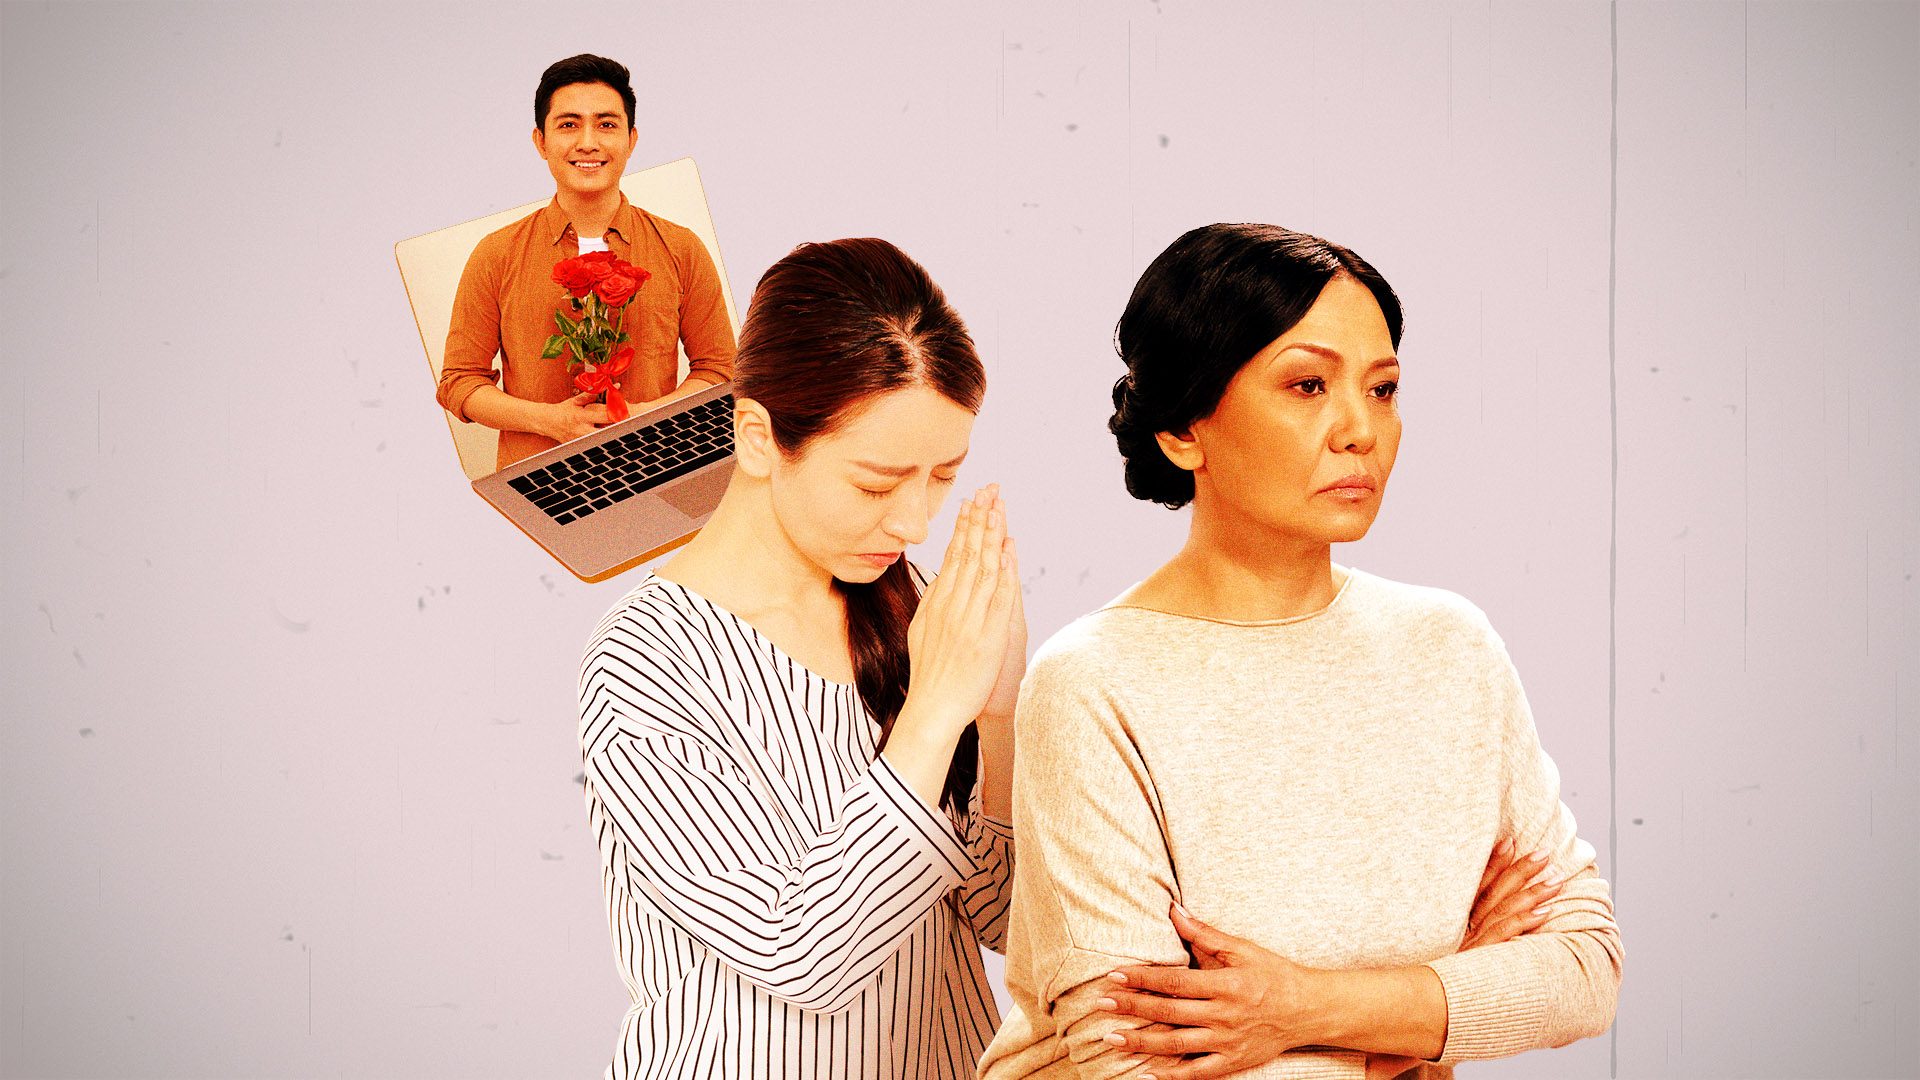 [Two Pronged] Mom wants me to dump my Asian boyfriend and find a Westerner